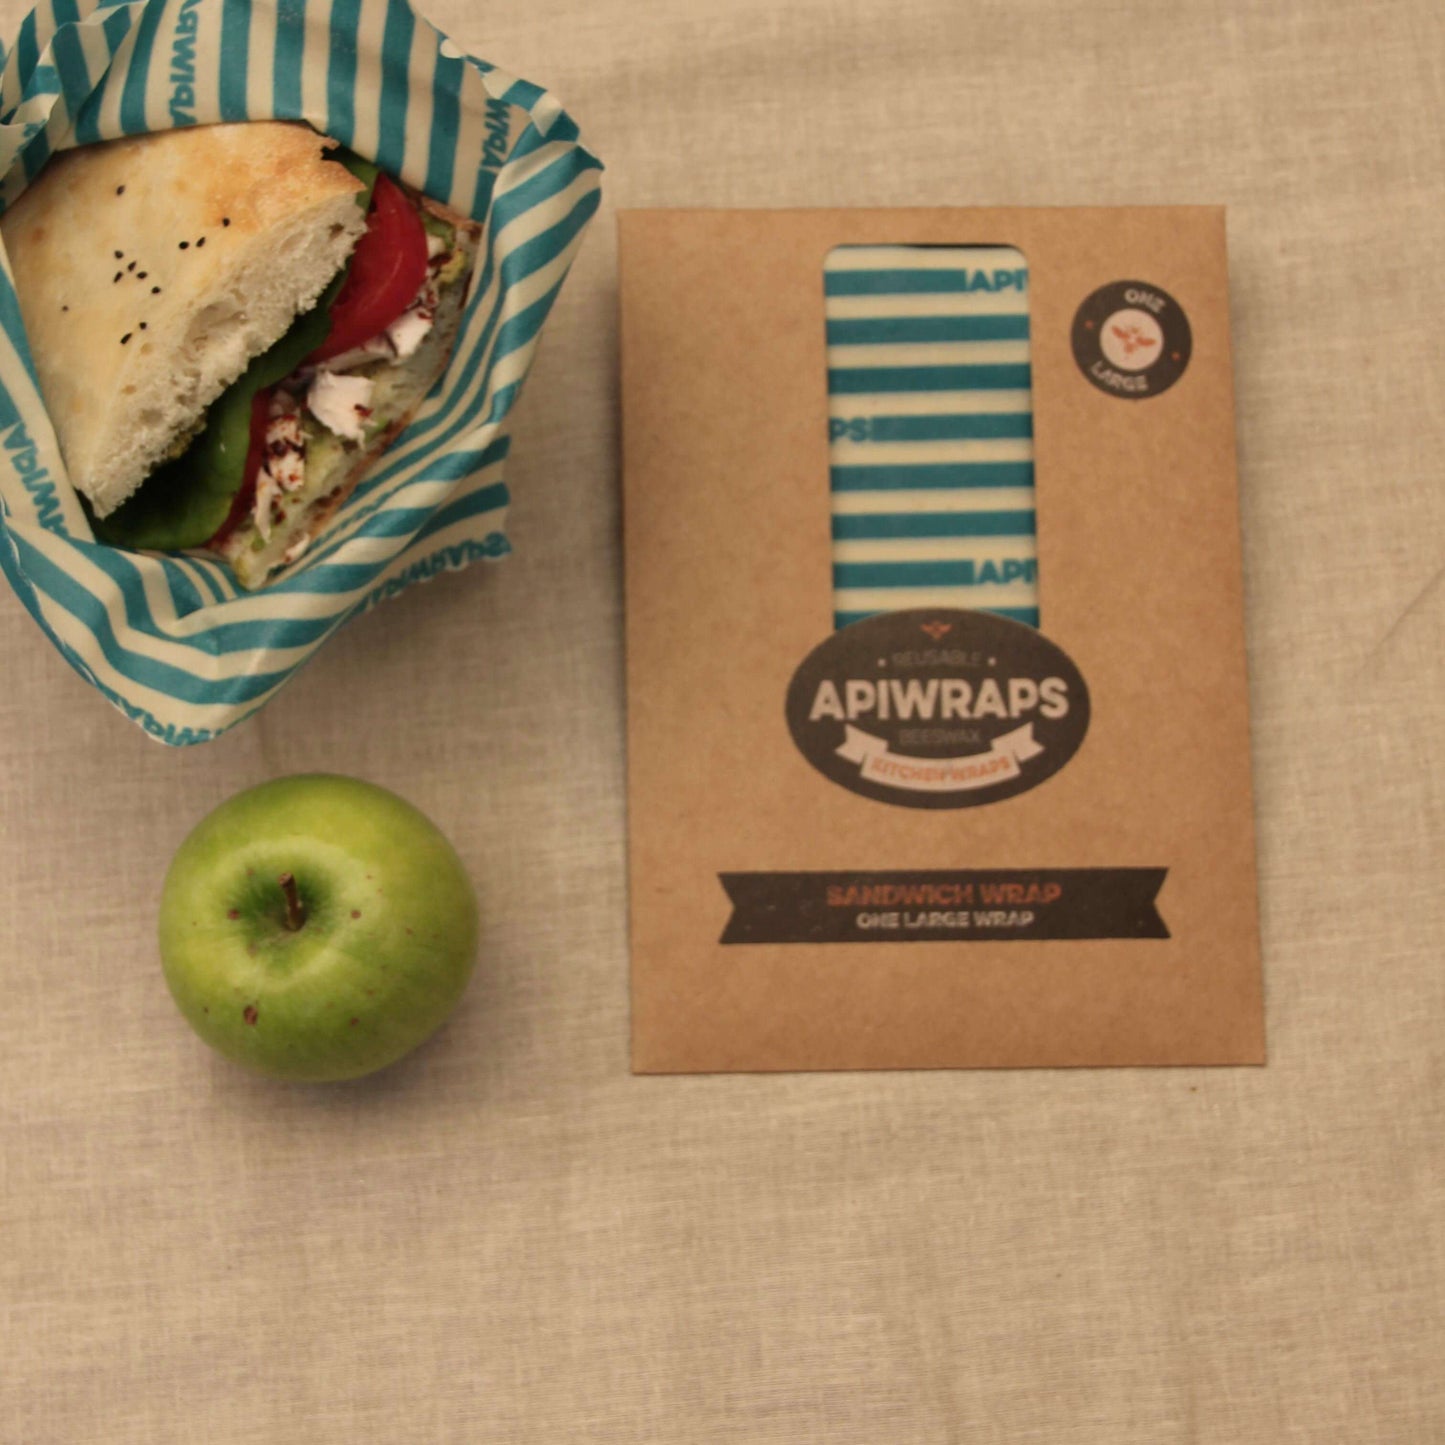 Apiwraps Reusable Beeswax Wraps, Sandwich Wrap, Contains One Large Wrap